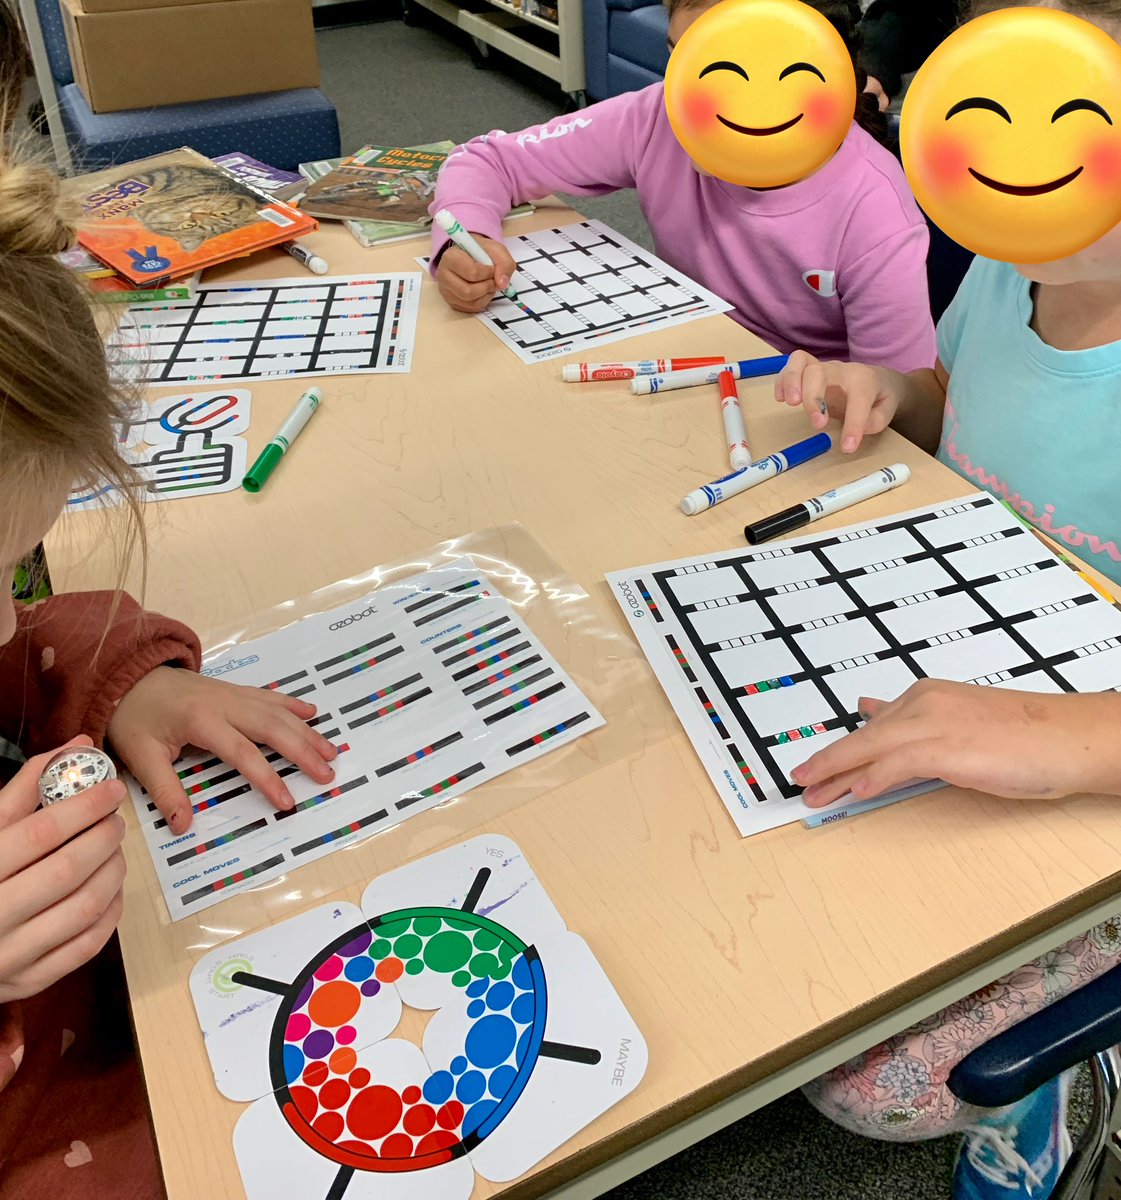 Day 3 of #computerscienceweek with Grade 3s, and we added Ozobots to the mix. So much excitement as we explored and played! #tvdsbLLC @LambethPS1 @JRichmond1969 @JenMrsjmann @TVDSB_STEM